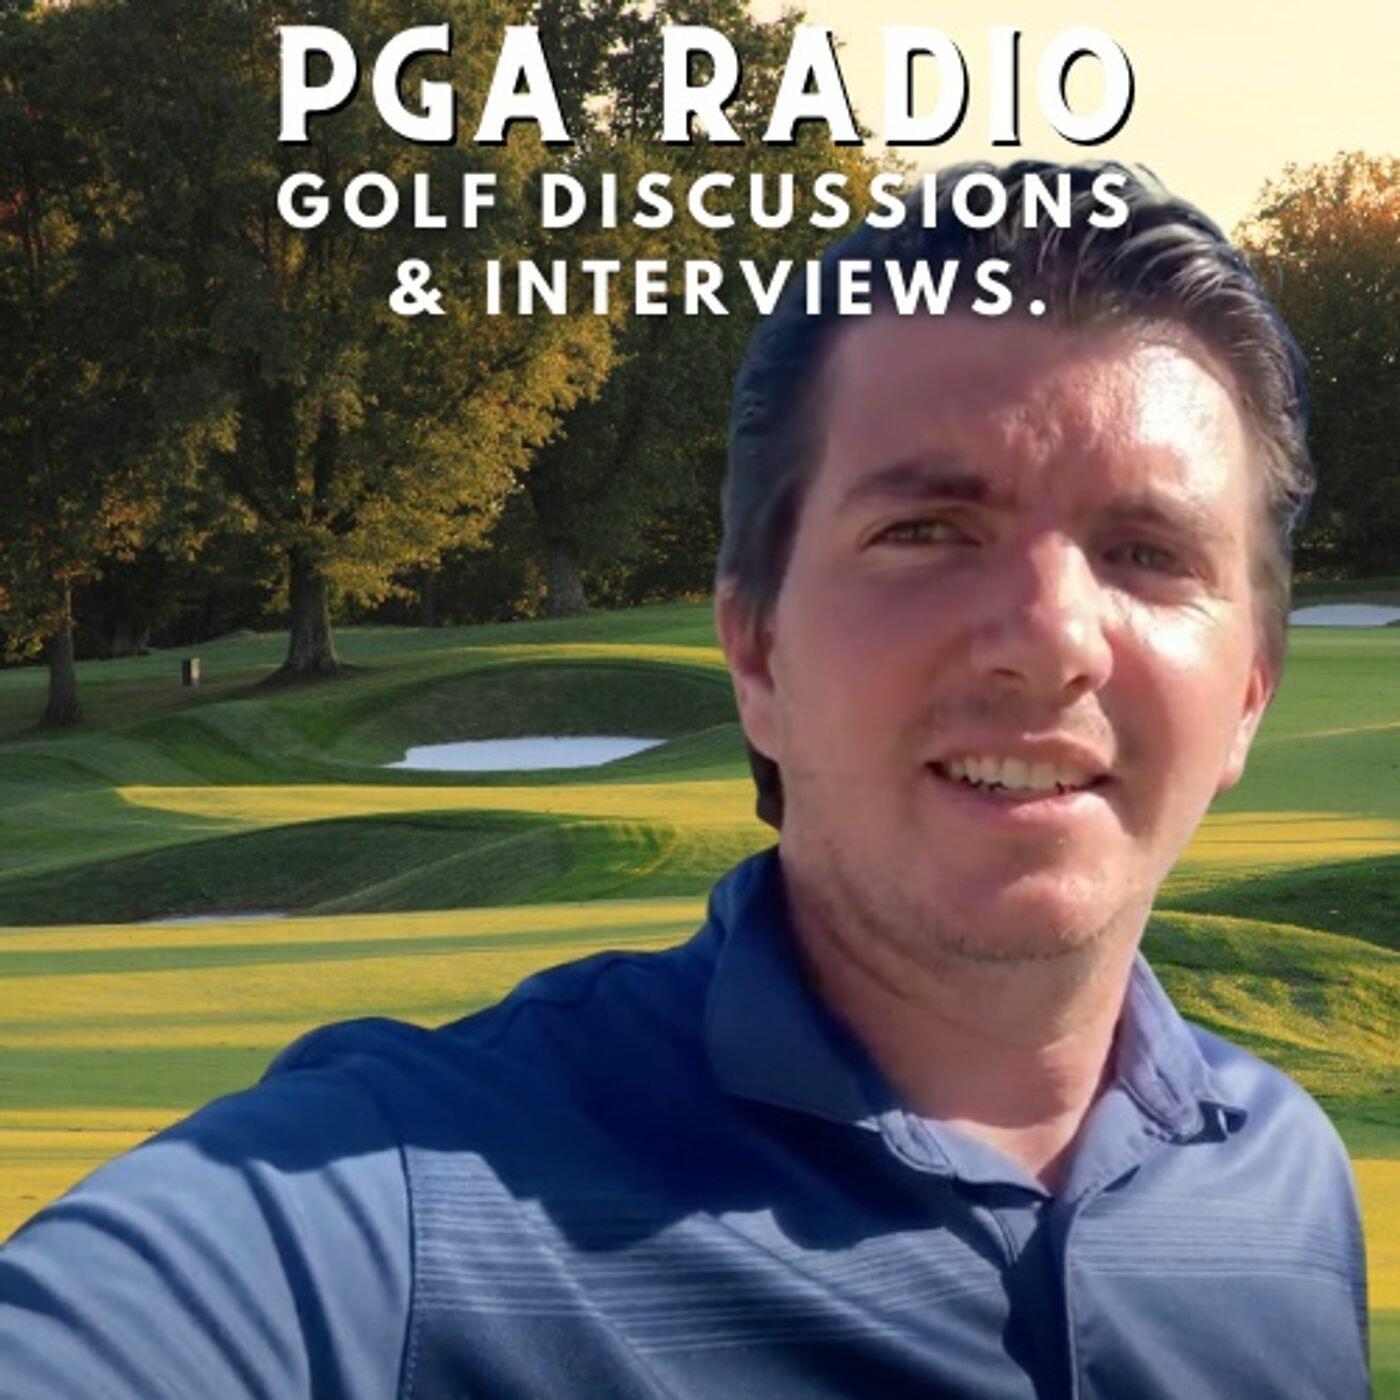 ♫ PGA Radio Golf Discussions, Interviews, and Commentary on the Days Events